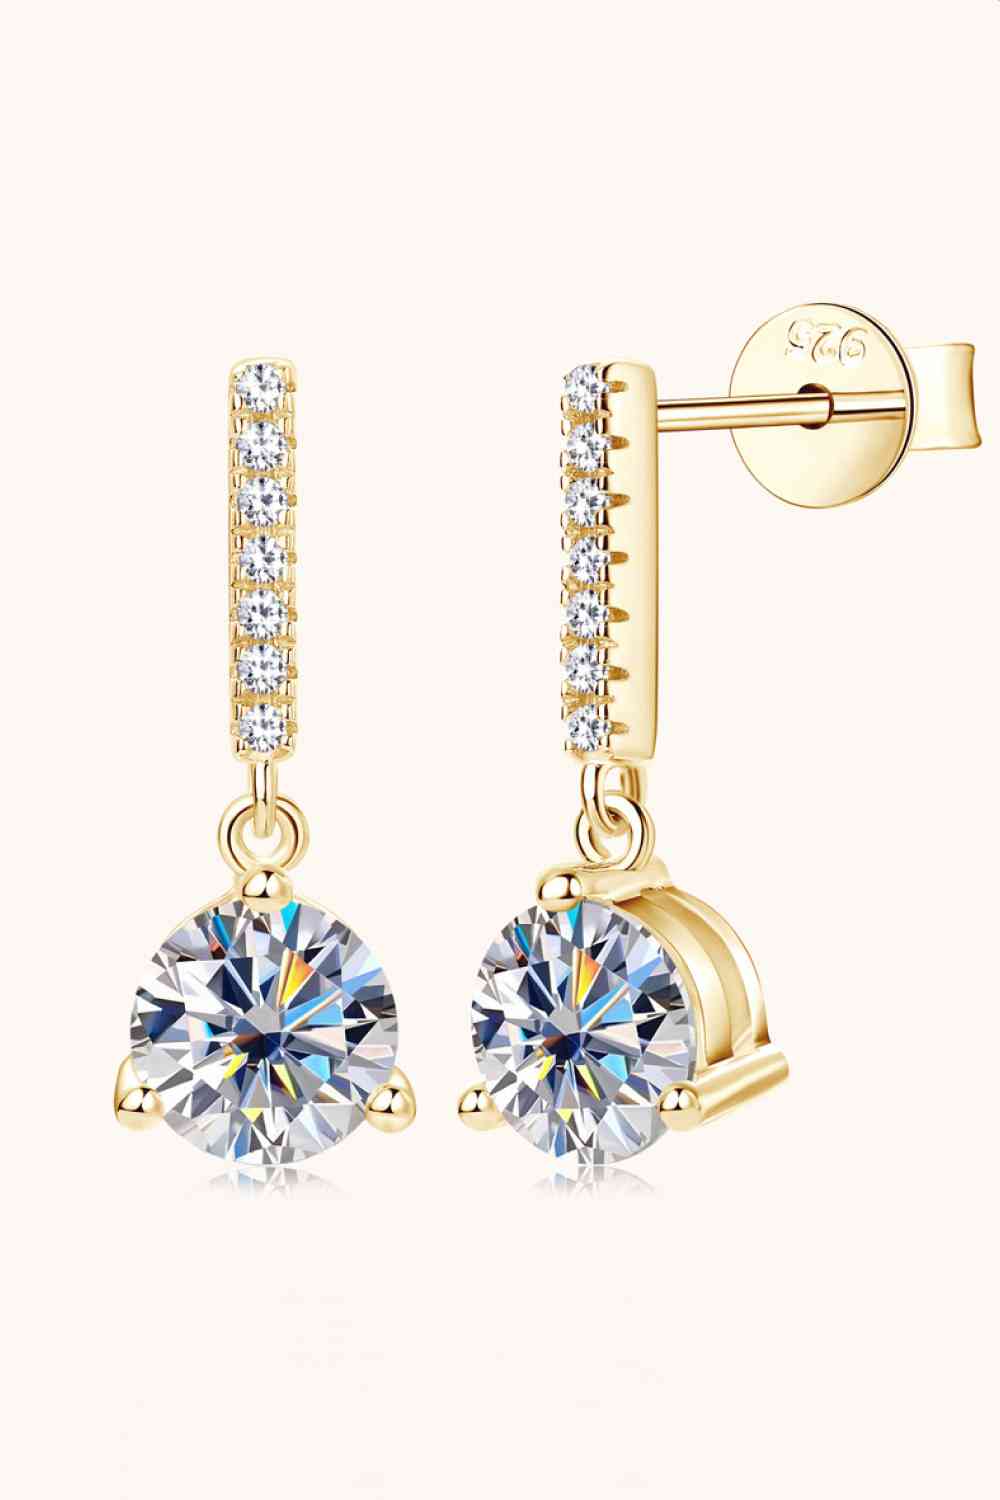 2 Carat Moissanite 925 Sterling Silver Drop Earrings - Shop Tophatter Deals, Electronics, Fashion, Jewelry, Health, Beauty, Home Decor, Free Shipping